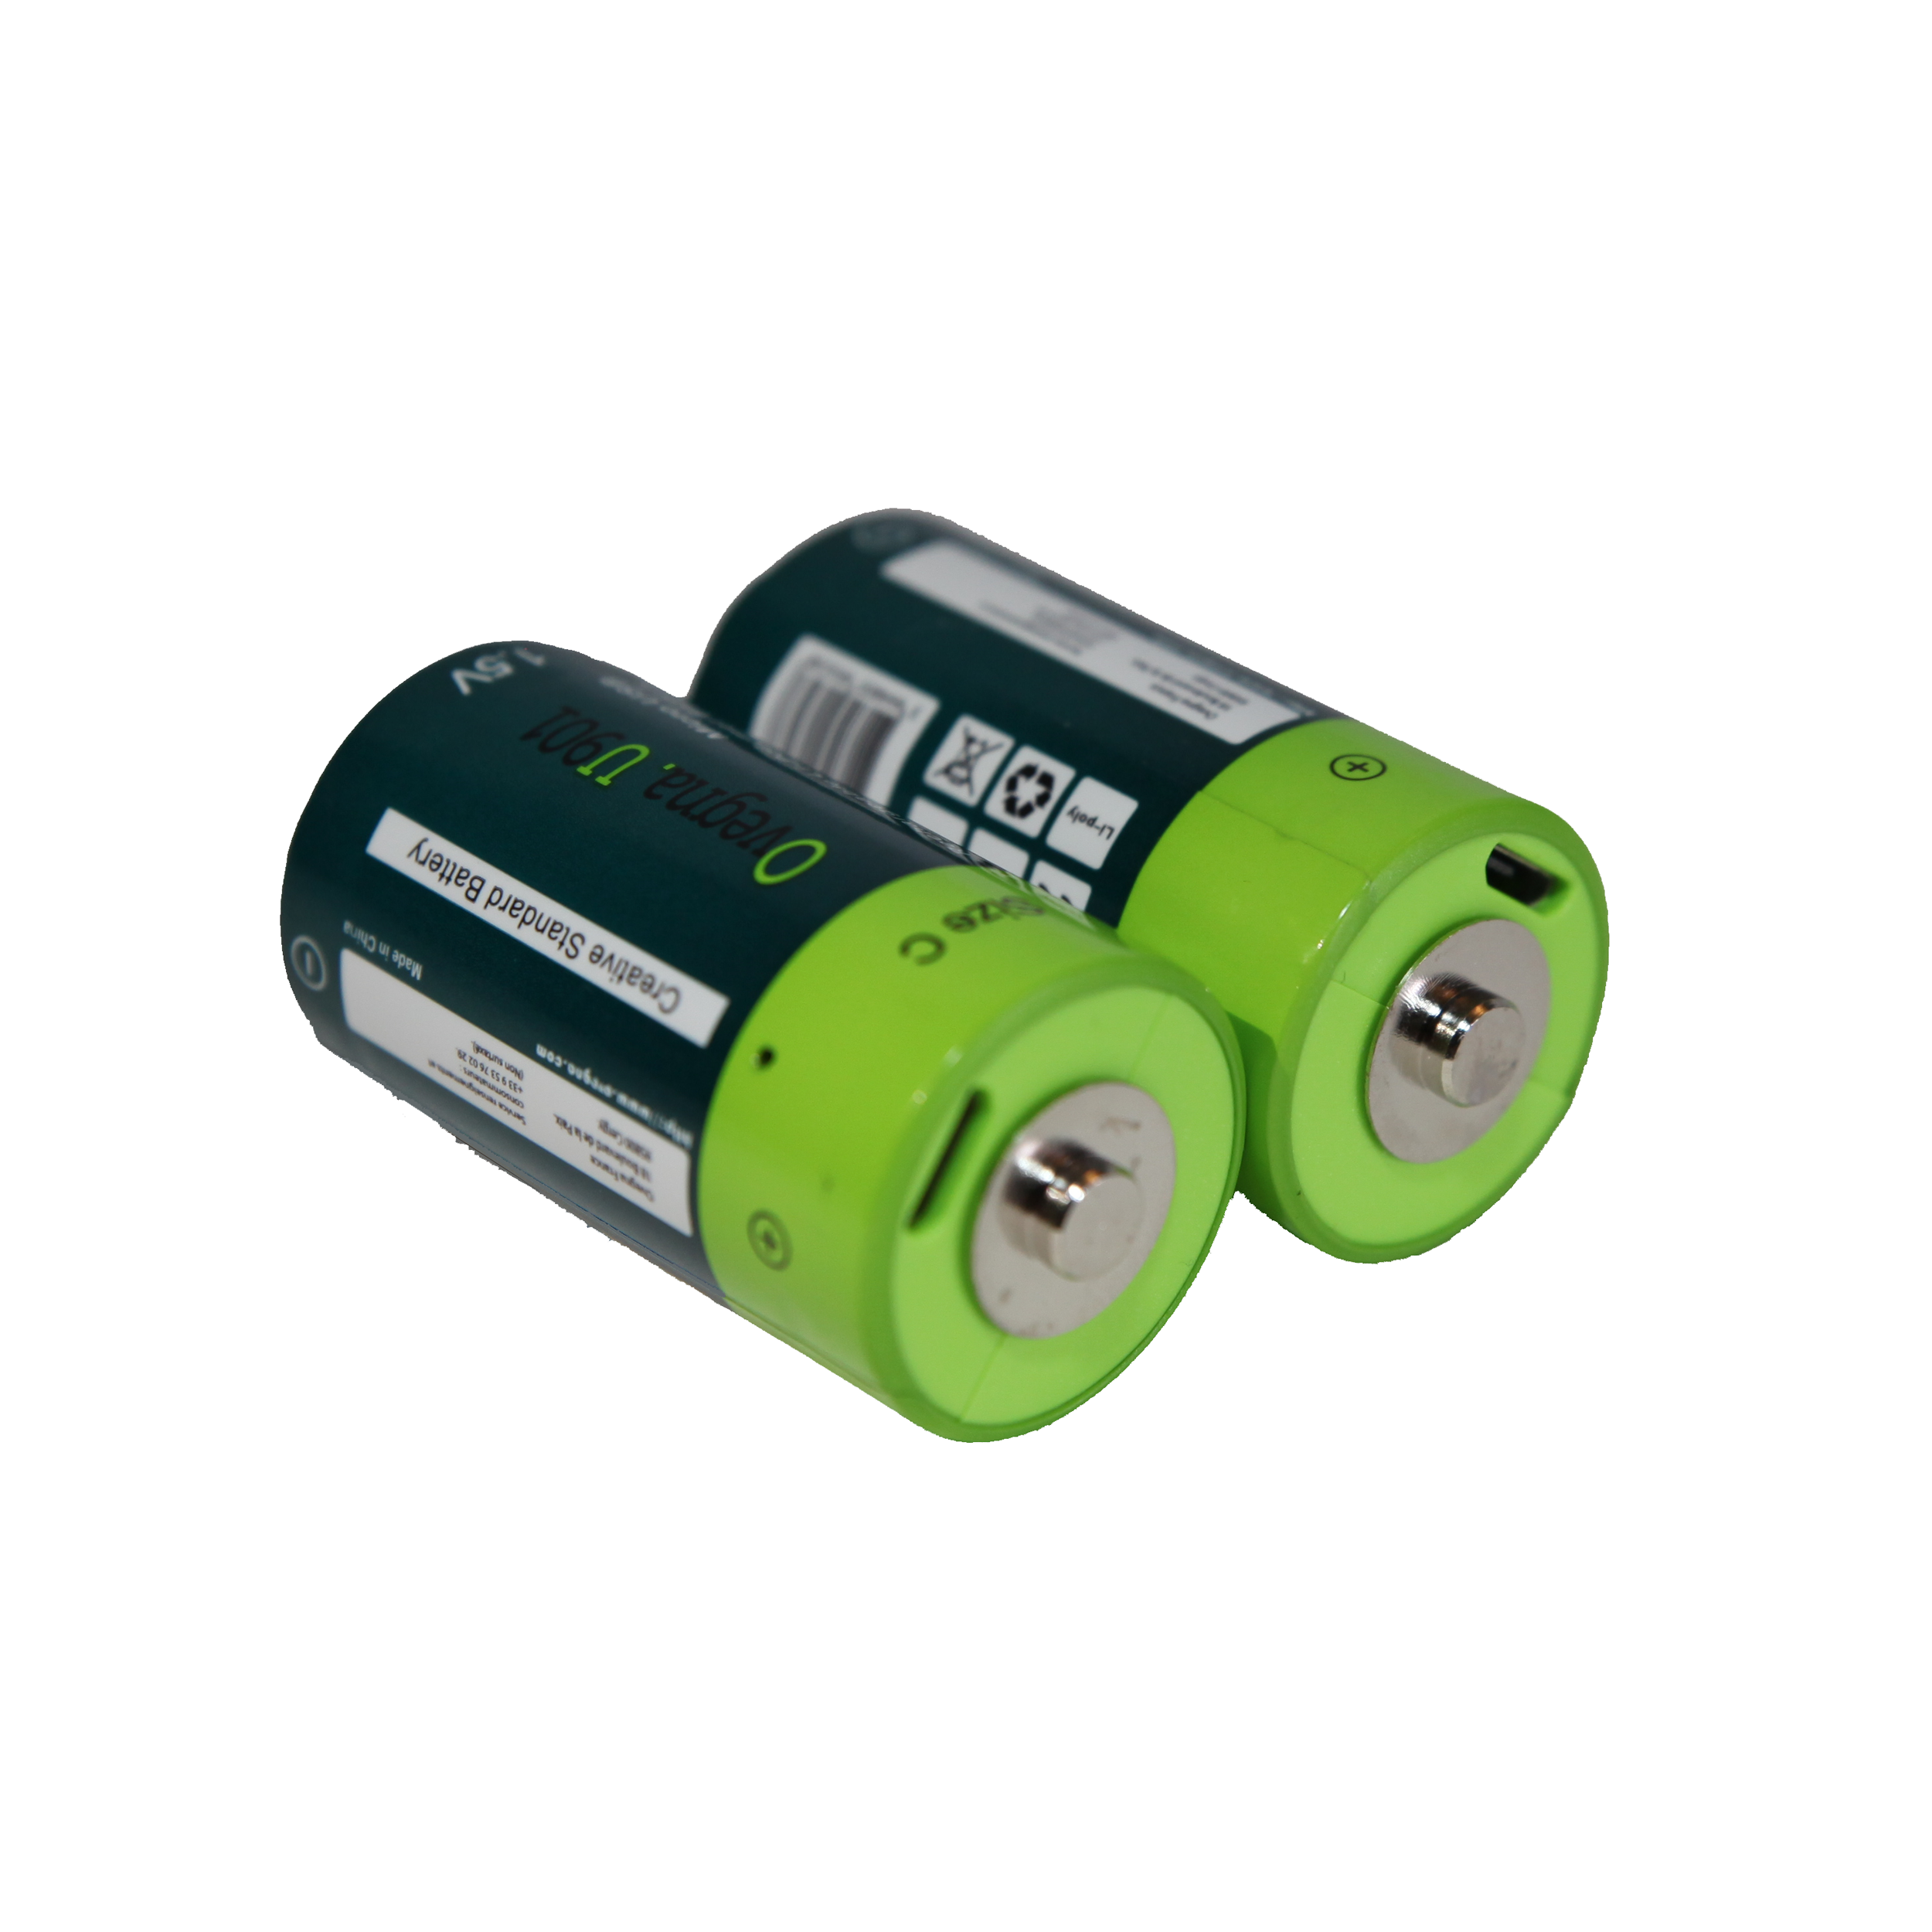 Ovegna U701 AAA Lithium-Ion Batteries (Non NiMH, Non-Alkaline) 600 mAh Rechargeable by Micro USB Input, 90 Minutes, 3000 Times, Charging Indicator, for Your Daily Needs Piles C : Ovegna U901 Green Hover